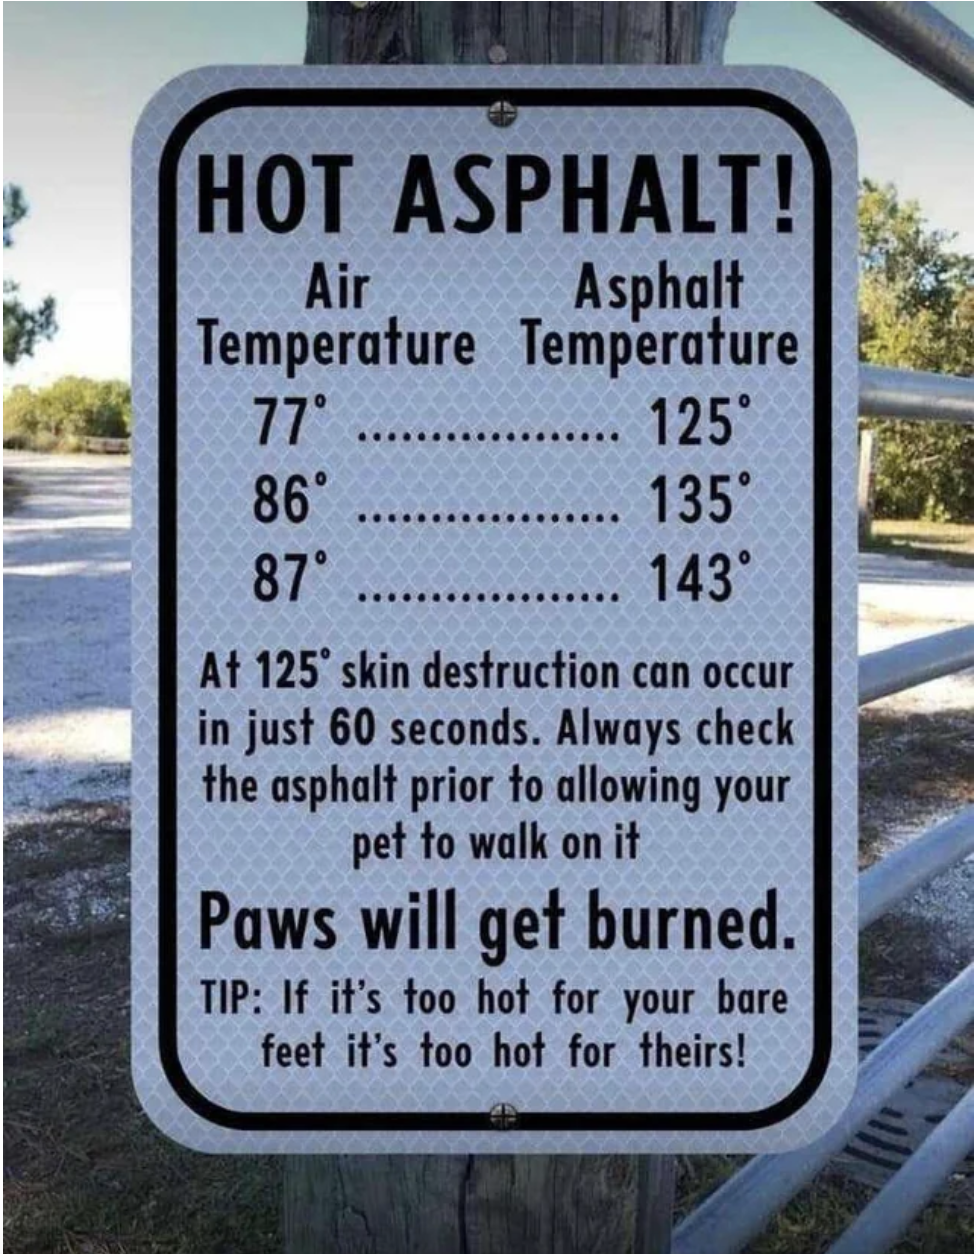 A sign showing how hot the asphalt is